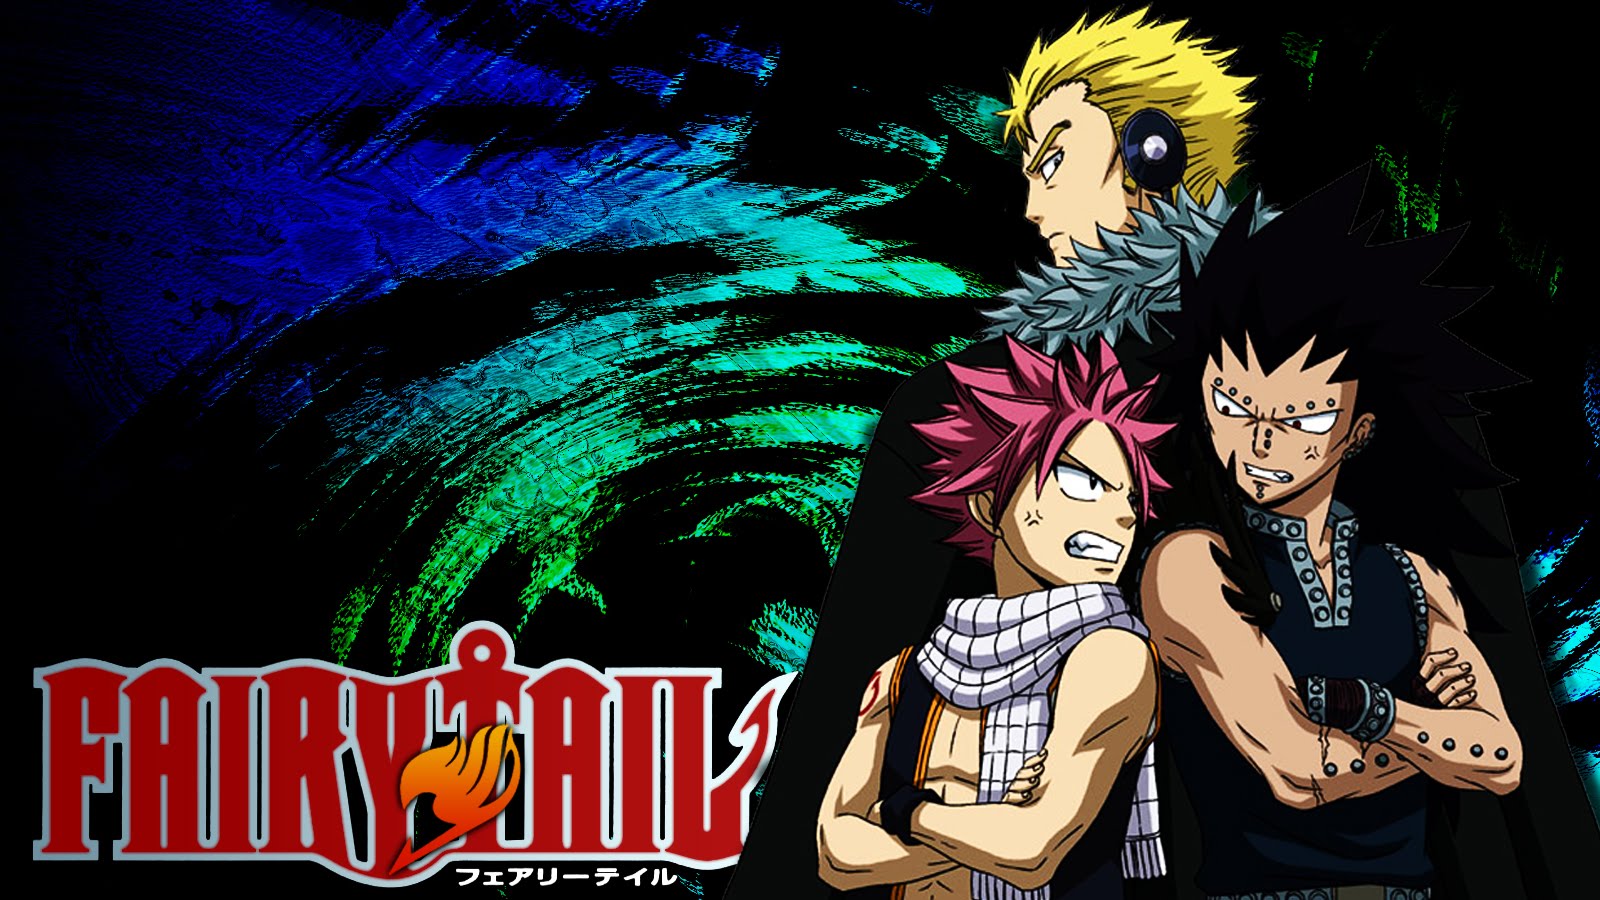 Free Download Wallpaper Laxus Fairy Tail Hd 273 Wallpaper High Quality 1600x900 For Your Desktop Mobile Tablet Explore 50 Fairy Tail Wallpaper For Iphone Fairy Tail Hd Wallpaper Download